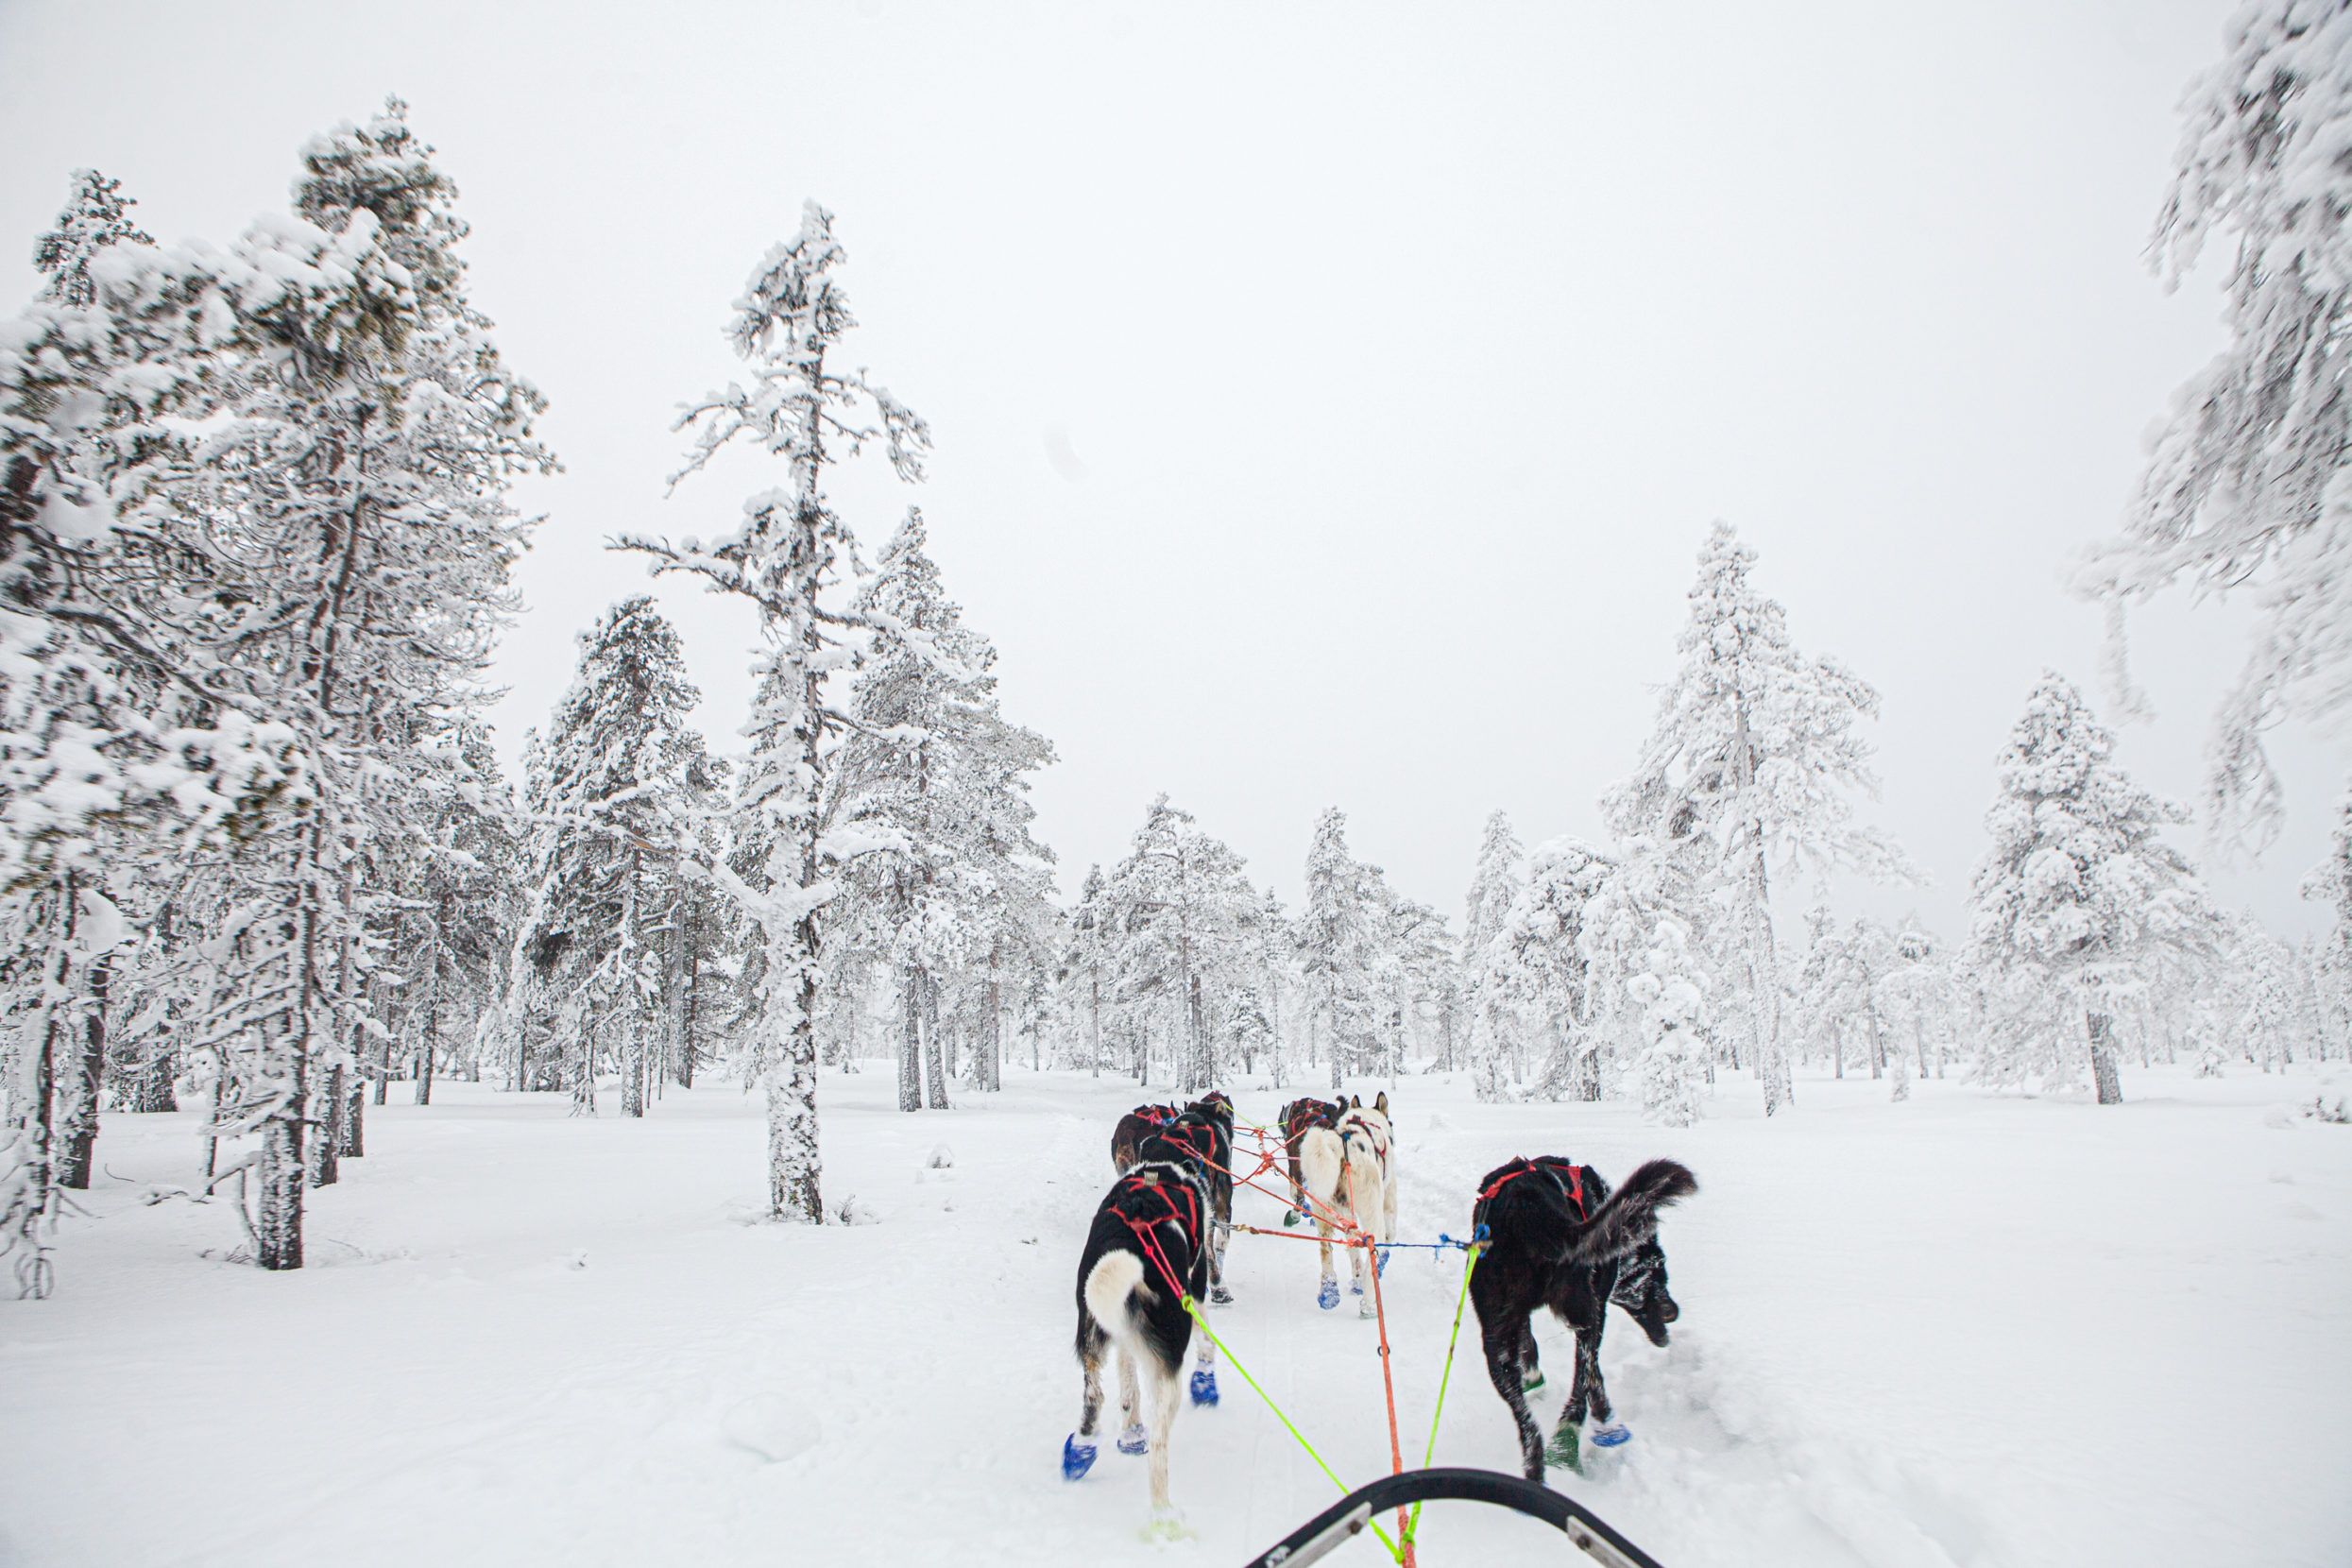 Van Rijn drinks in Norway’s winter wonderland while training her team of dogs — while the huskies sometimes slurp up the snow itself, as the black dog on the right demonstrates here. Photo: Edmée van Rijn.